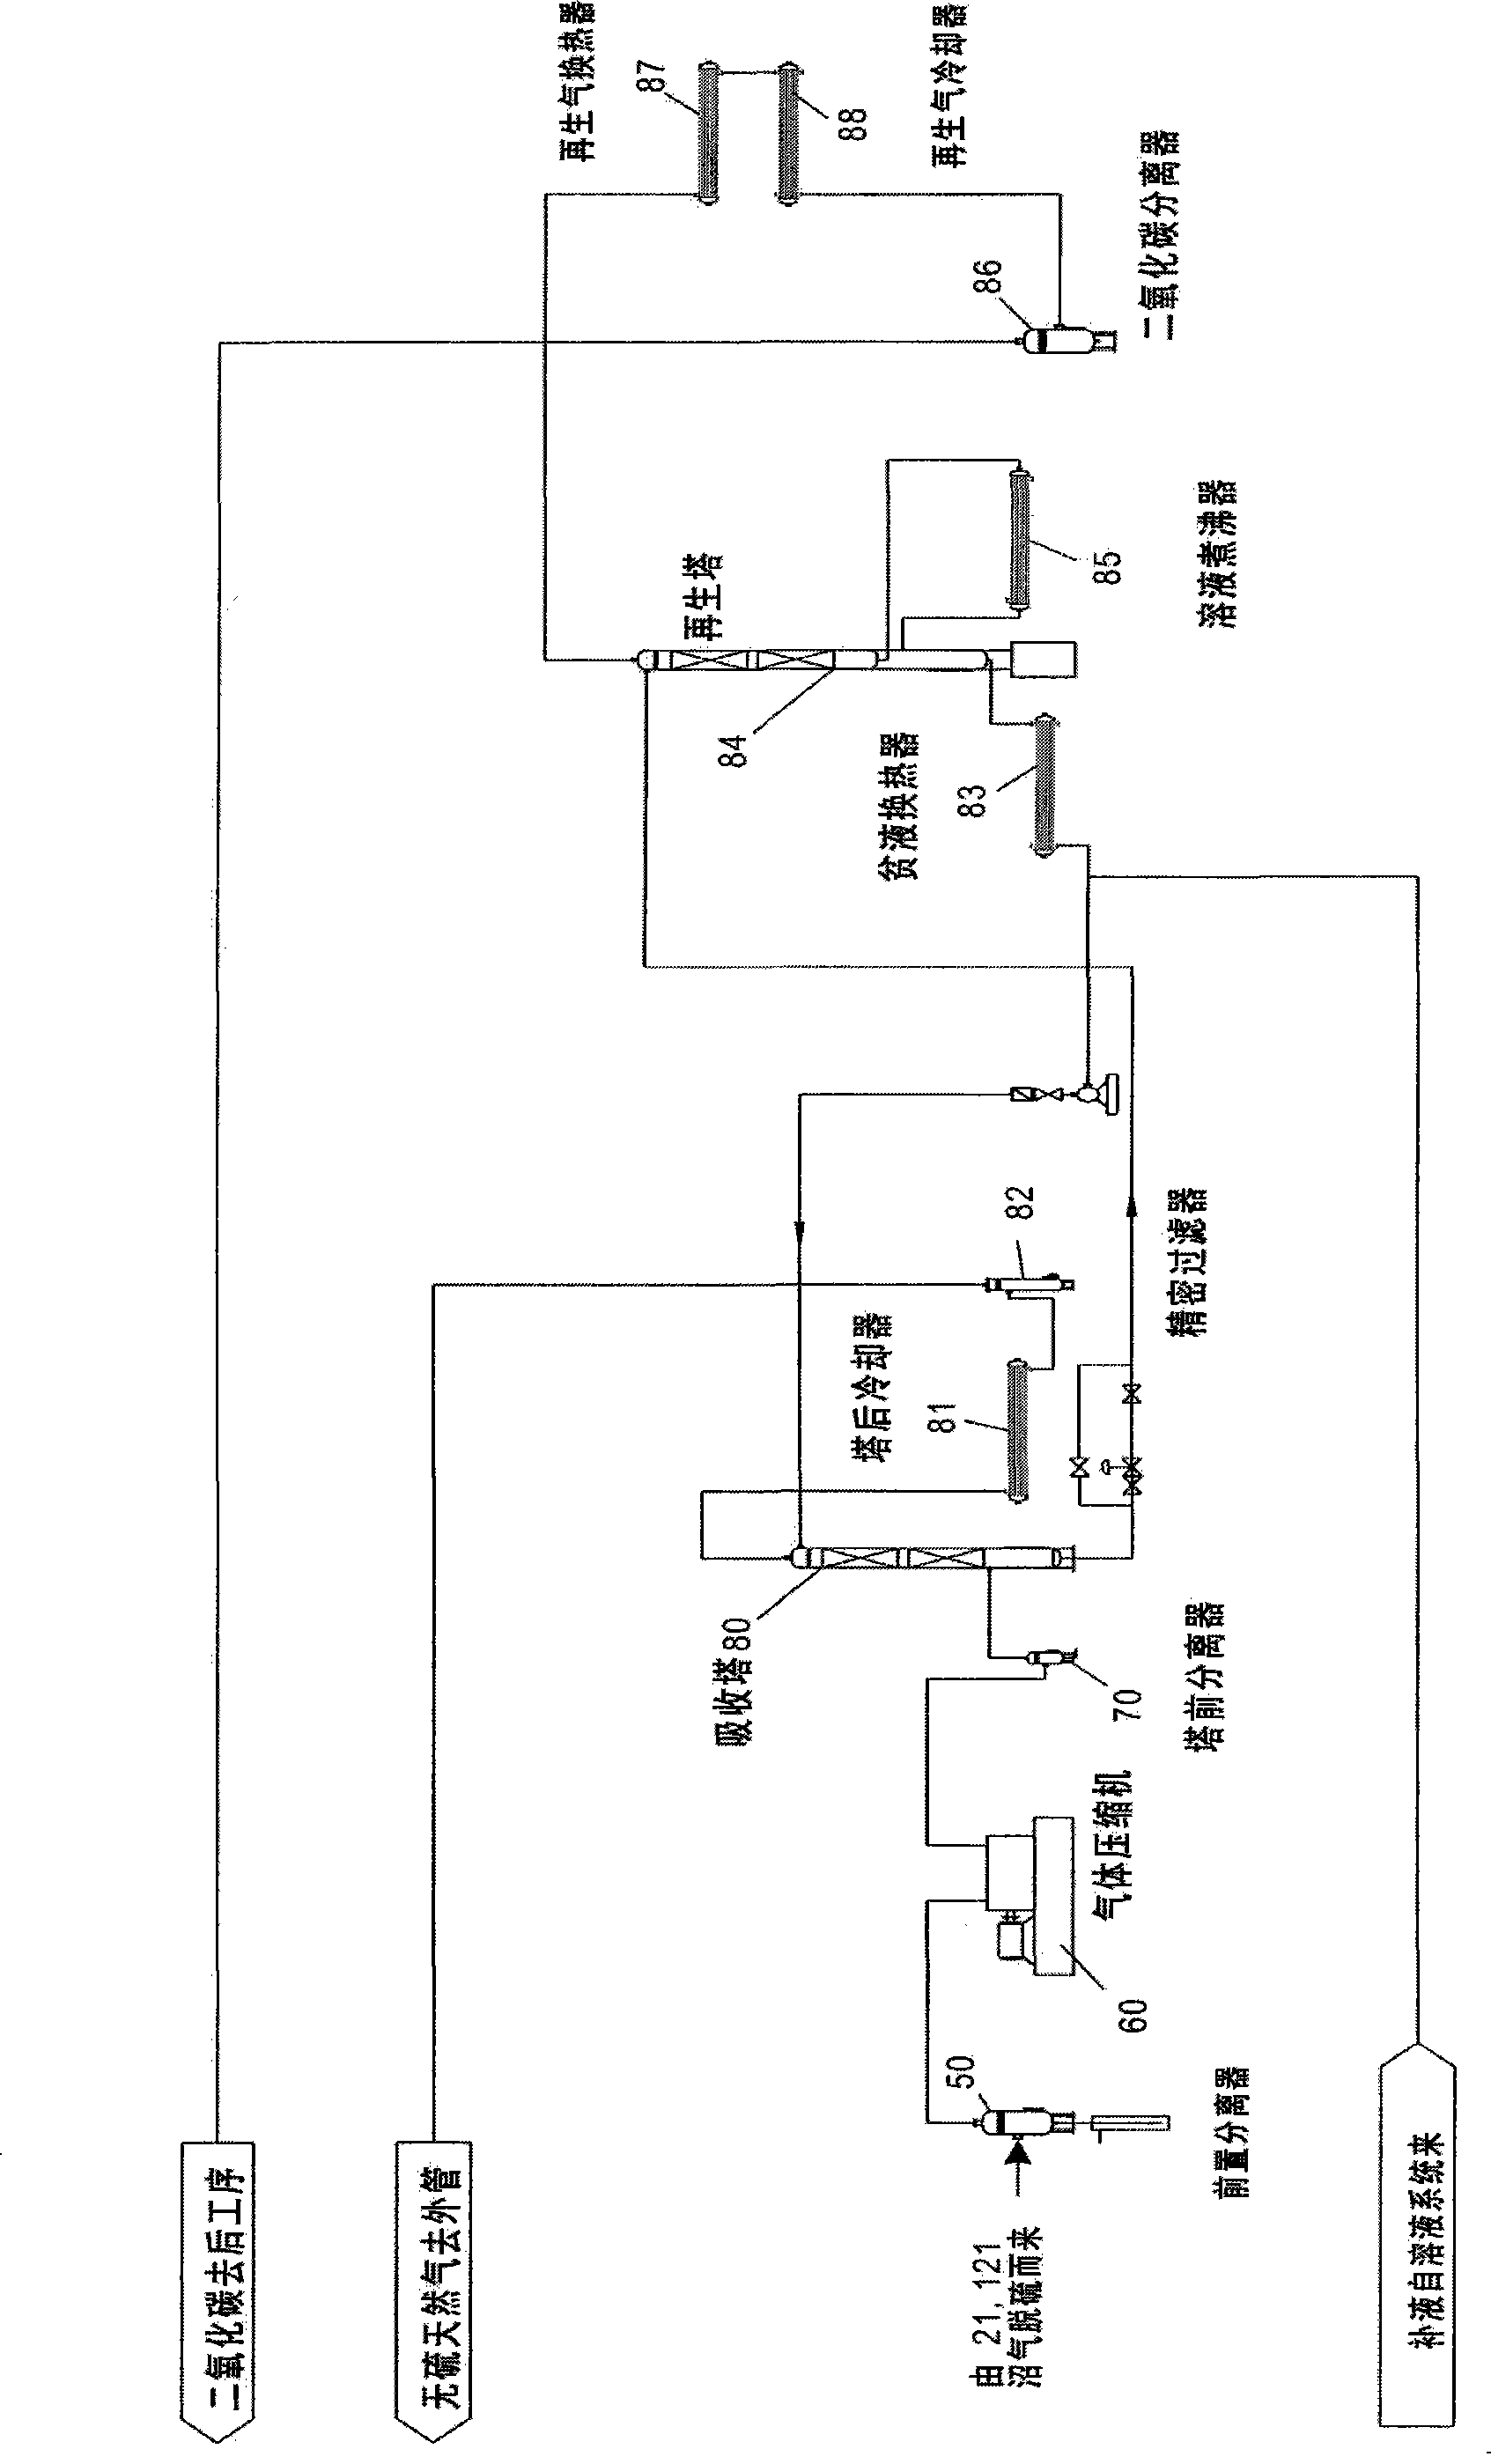 Method and apparatus for preparing sulfur-free natural gas from methane